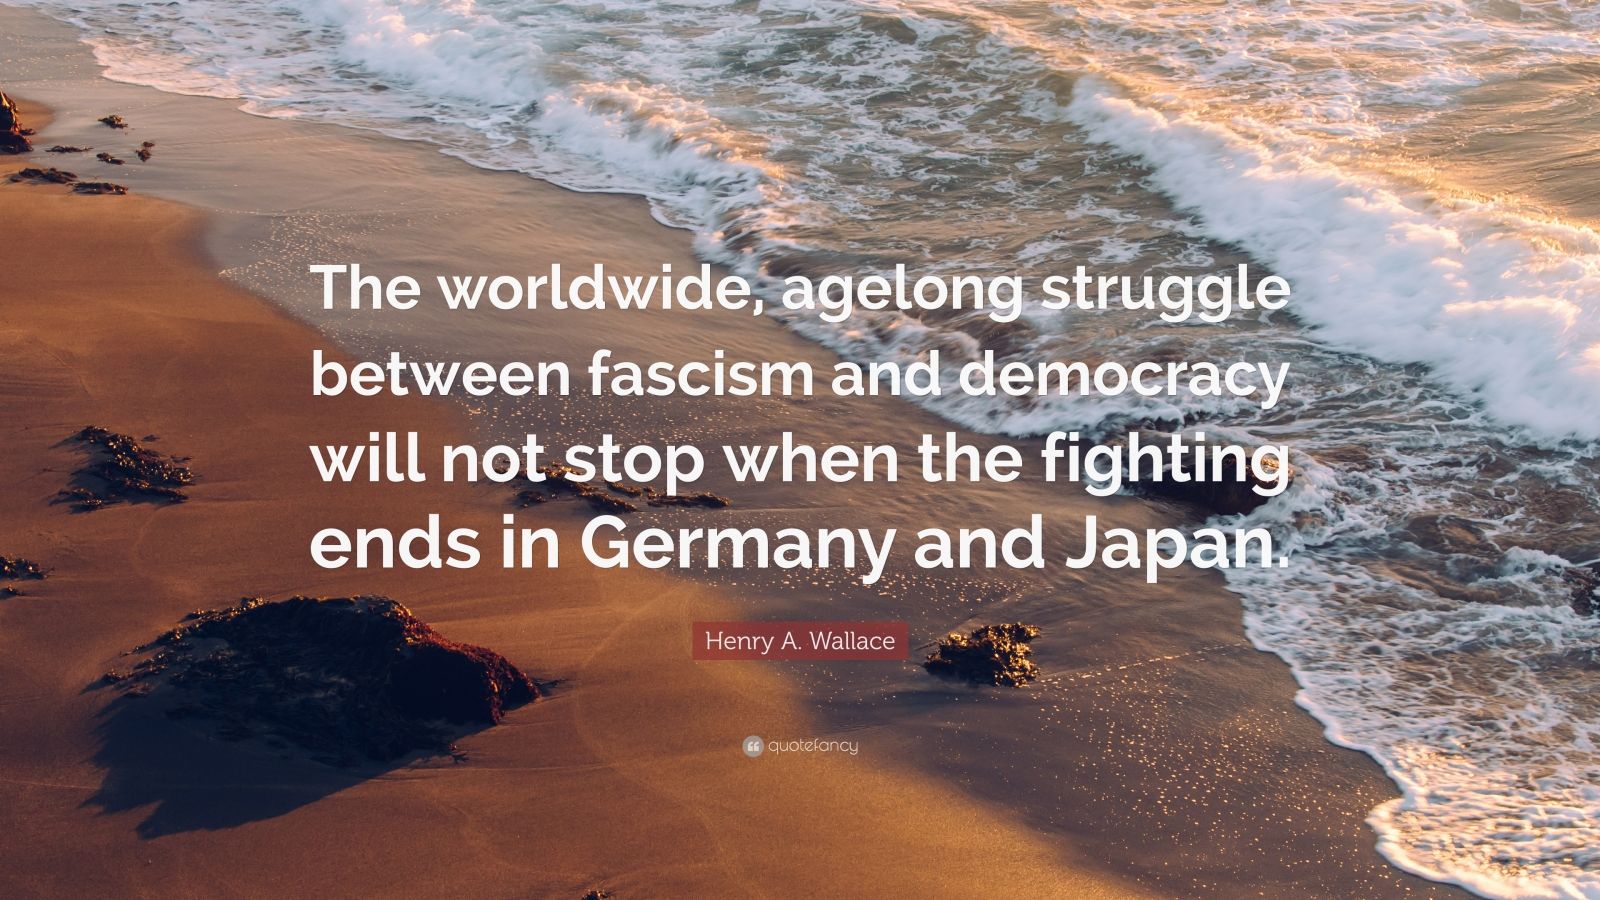 Henry A. Wallace Quote: “The worldwide, agelong struggle between